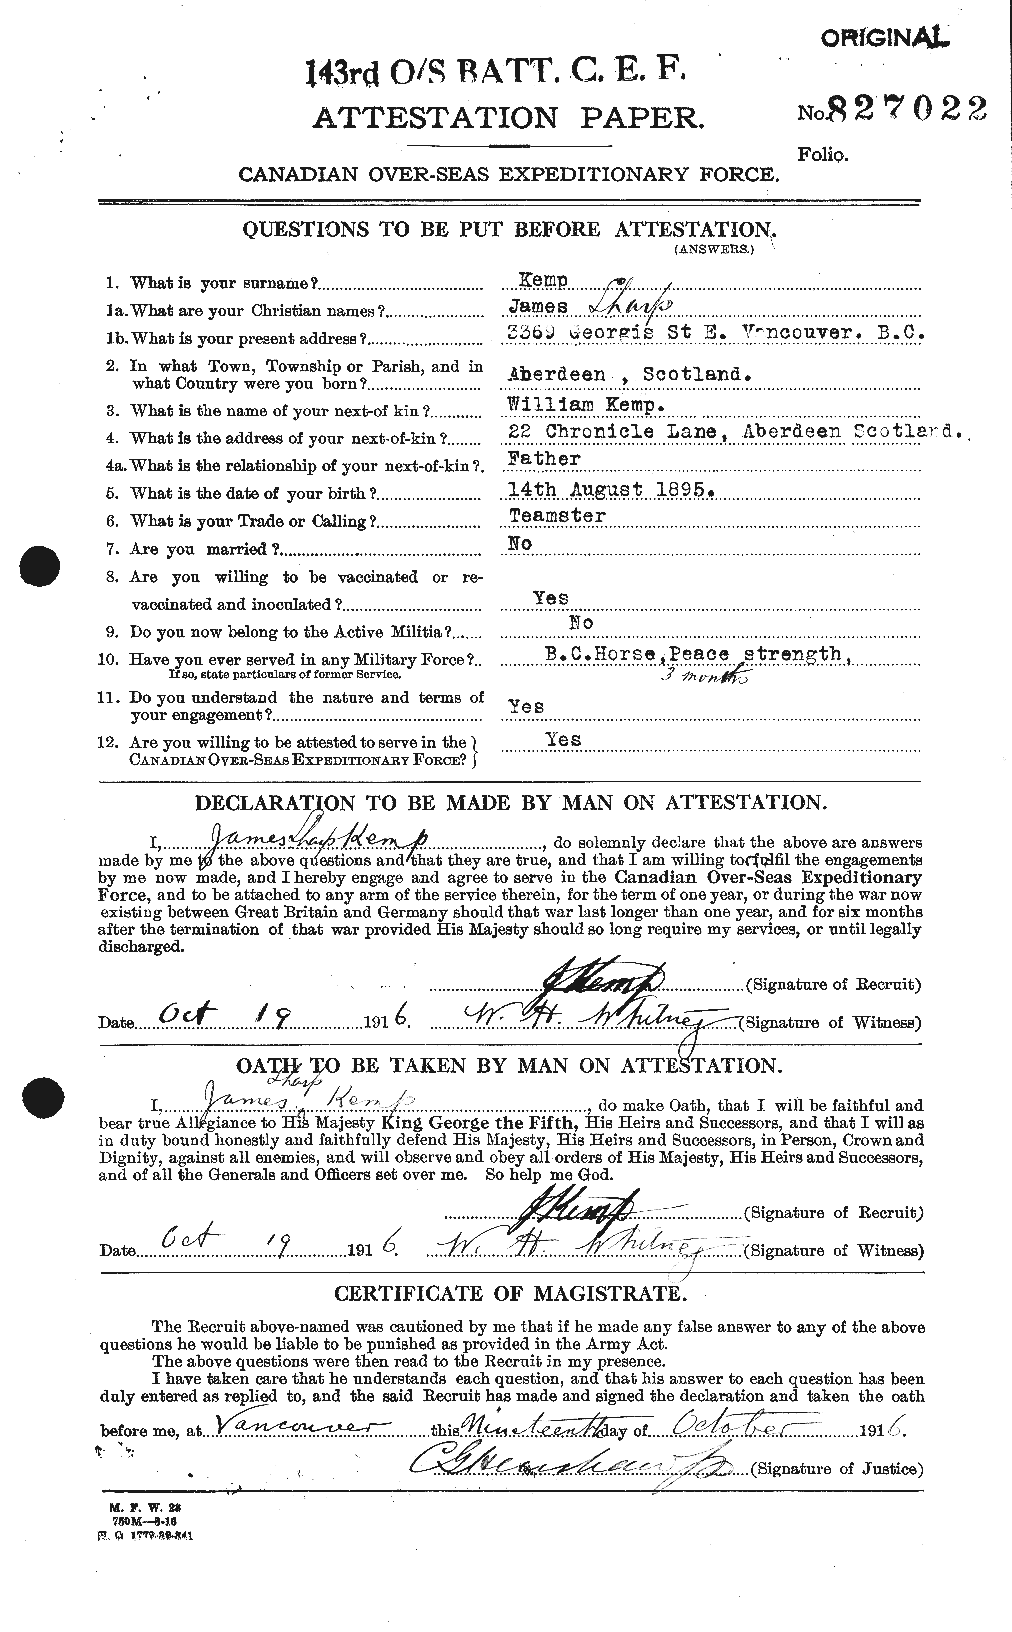 Personnel Records of the First World War - CEF 433355a